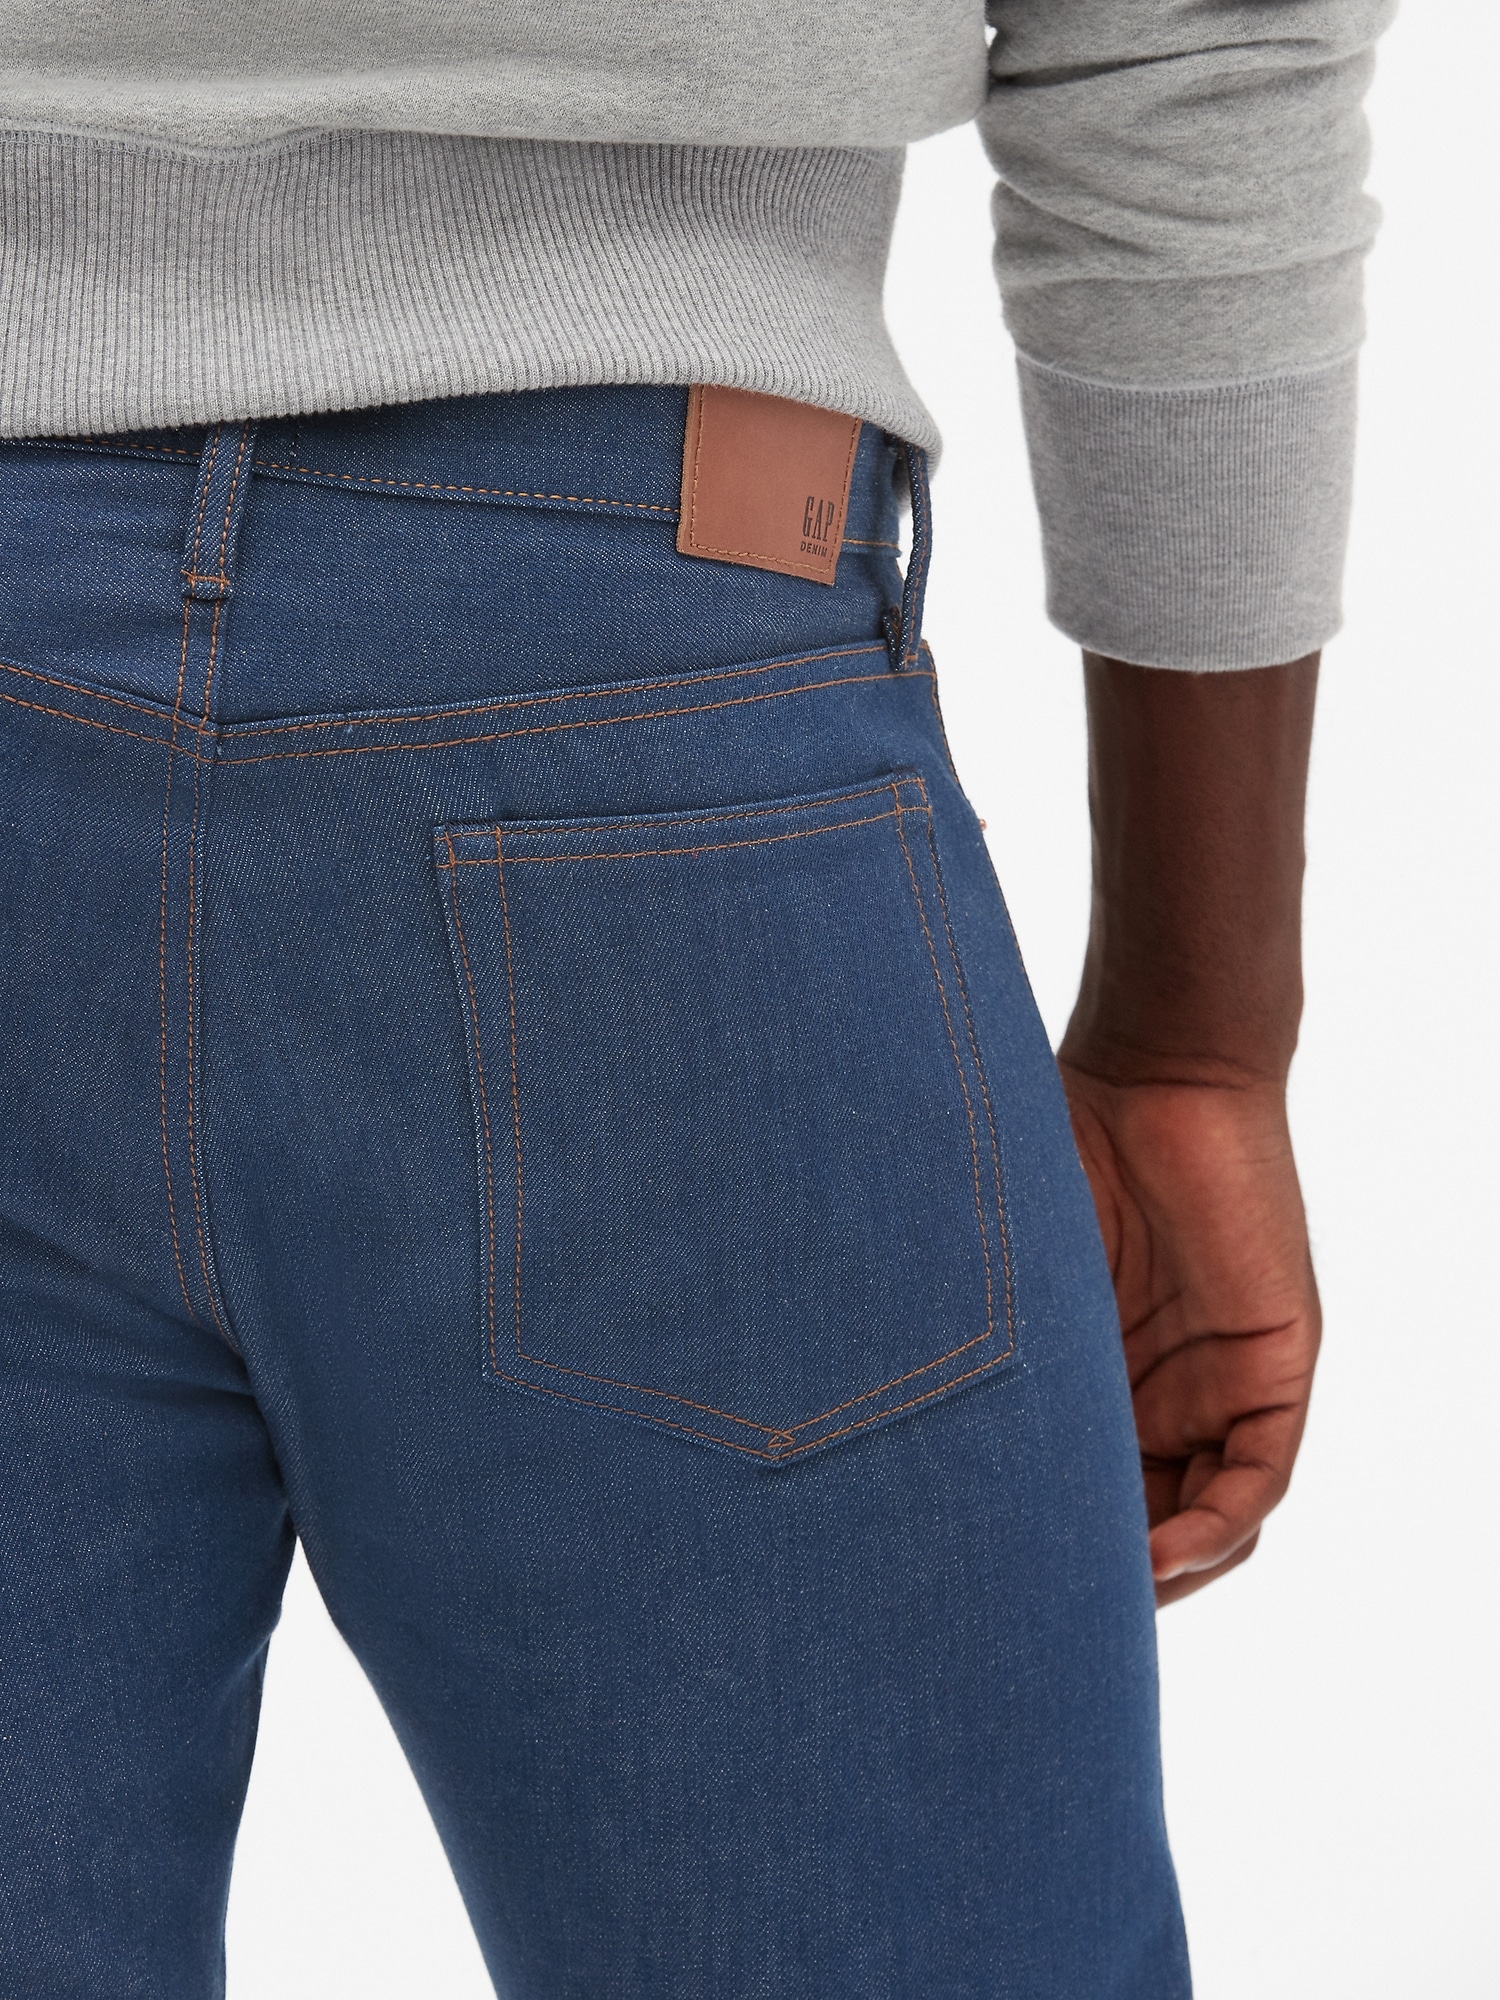 Fit Gap Selvedge Denim® Slim in Limited-Edition Cone | Jeans